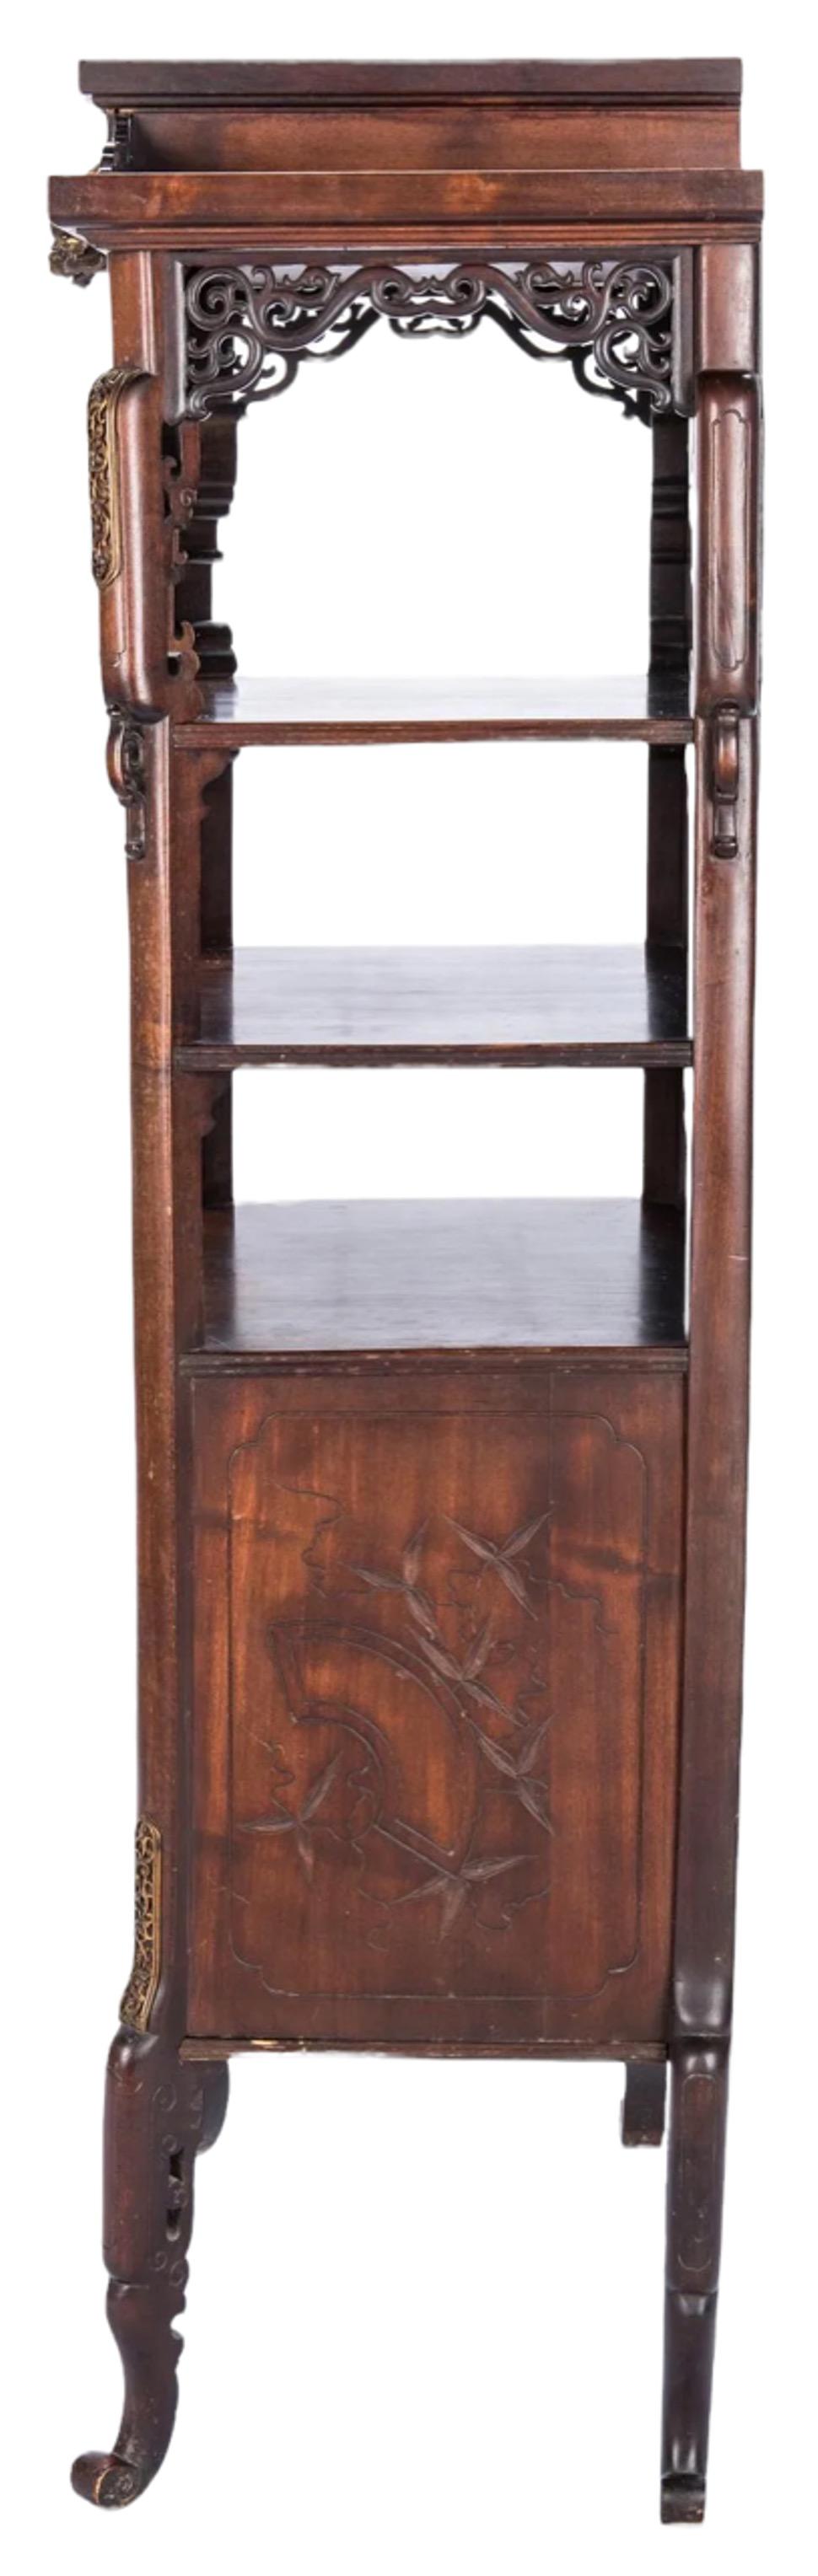 Hand-Carved Gabriel Viardot Signed 19th Century French Chinoiserie Music Cabinet For Sale